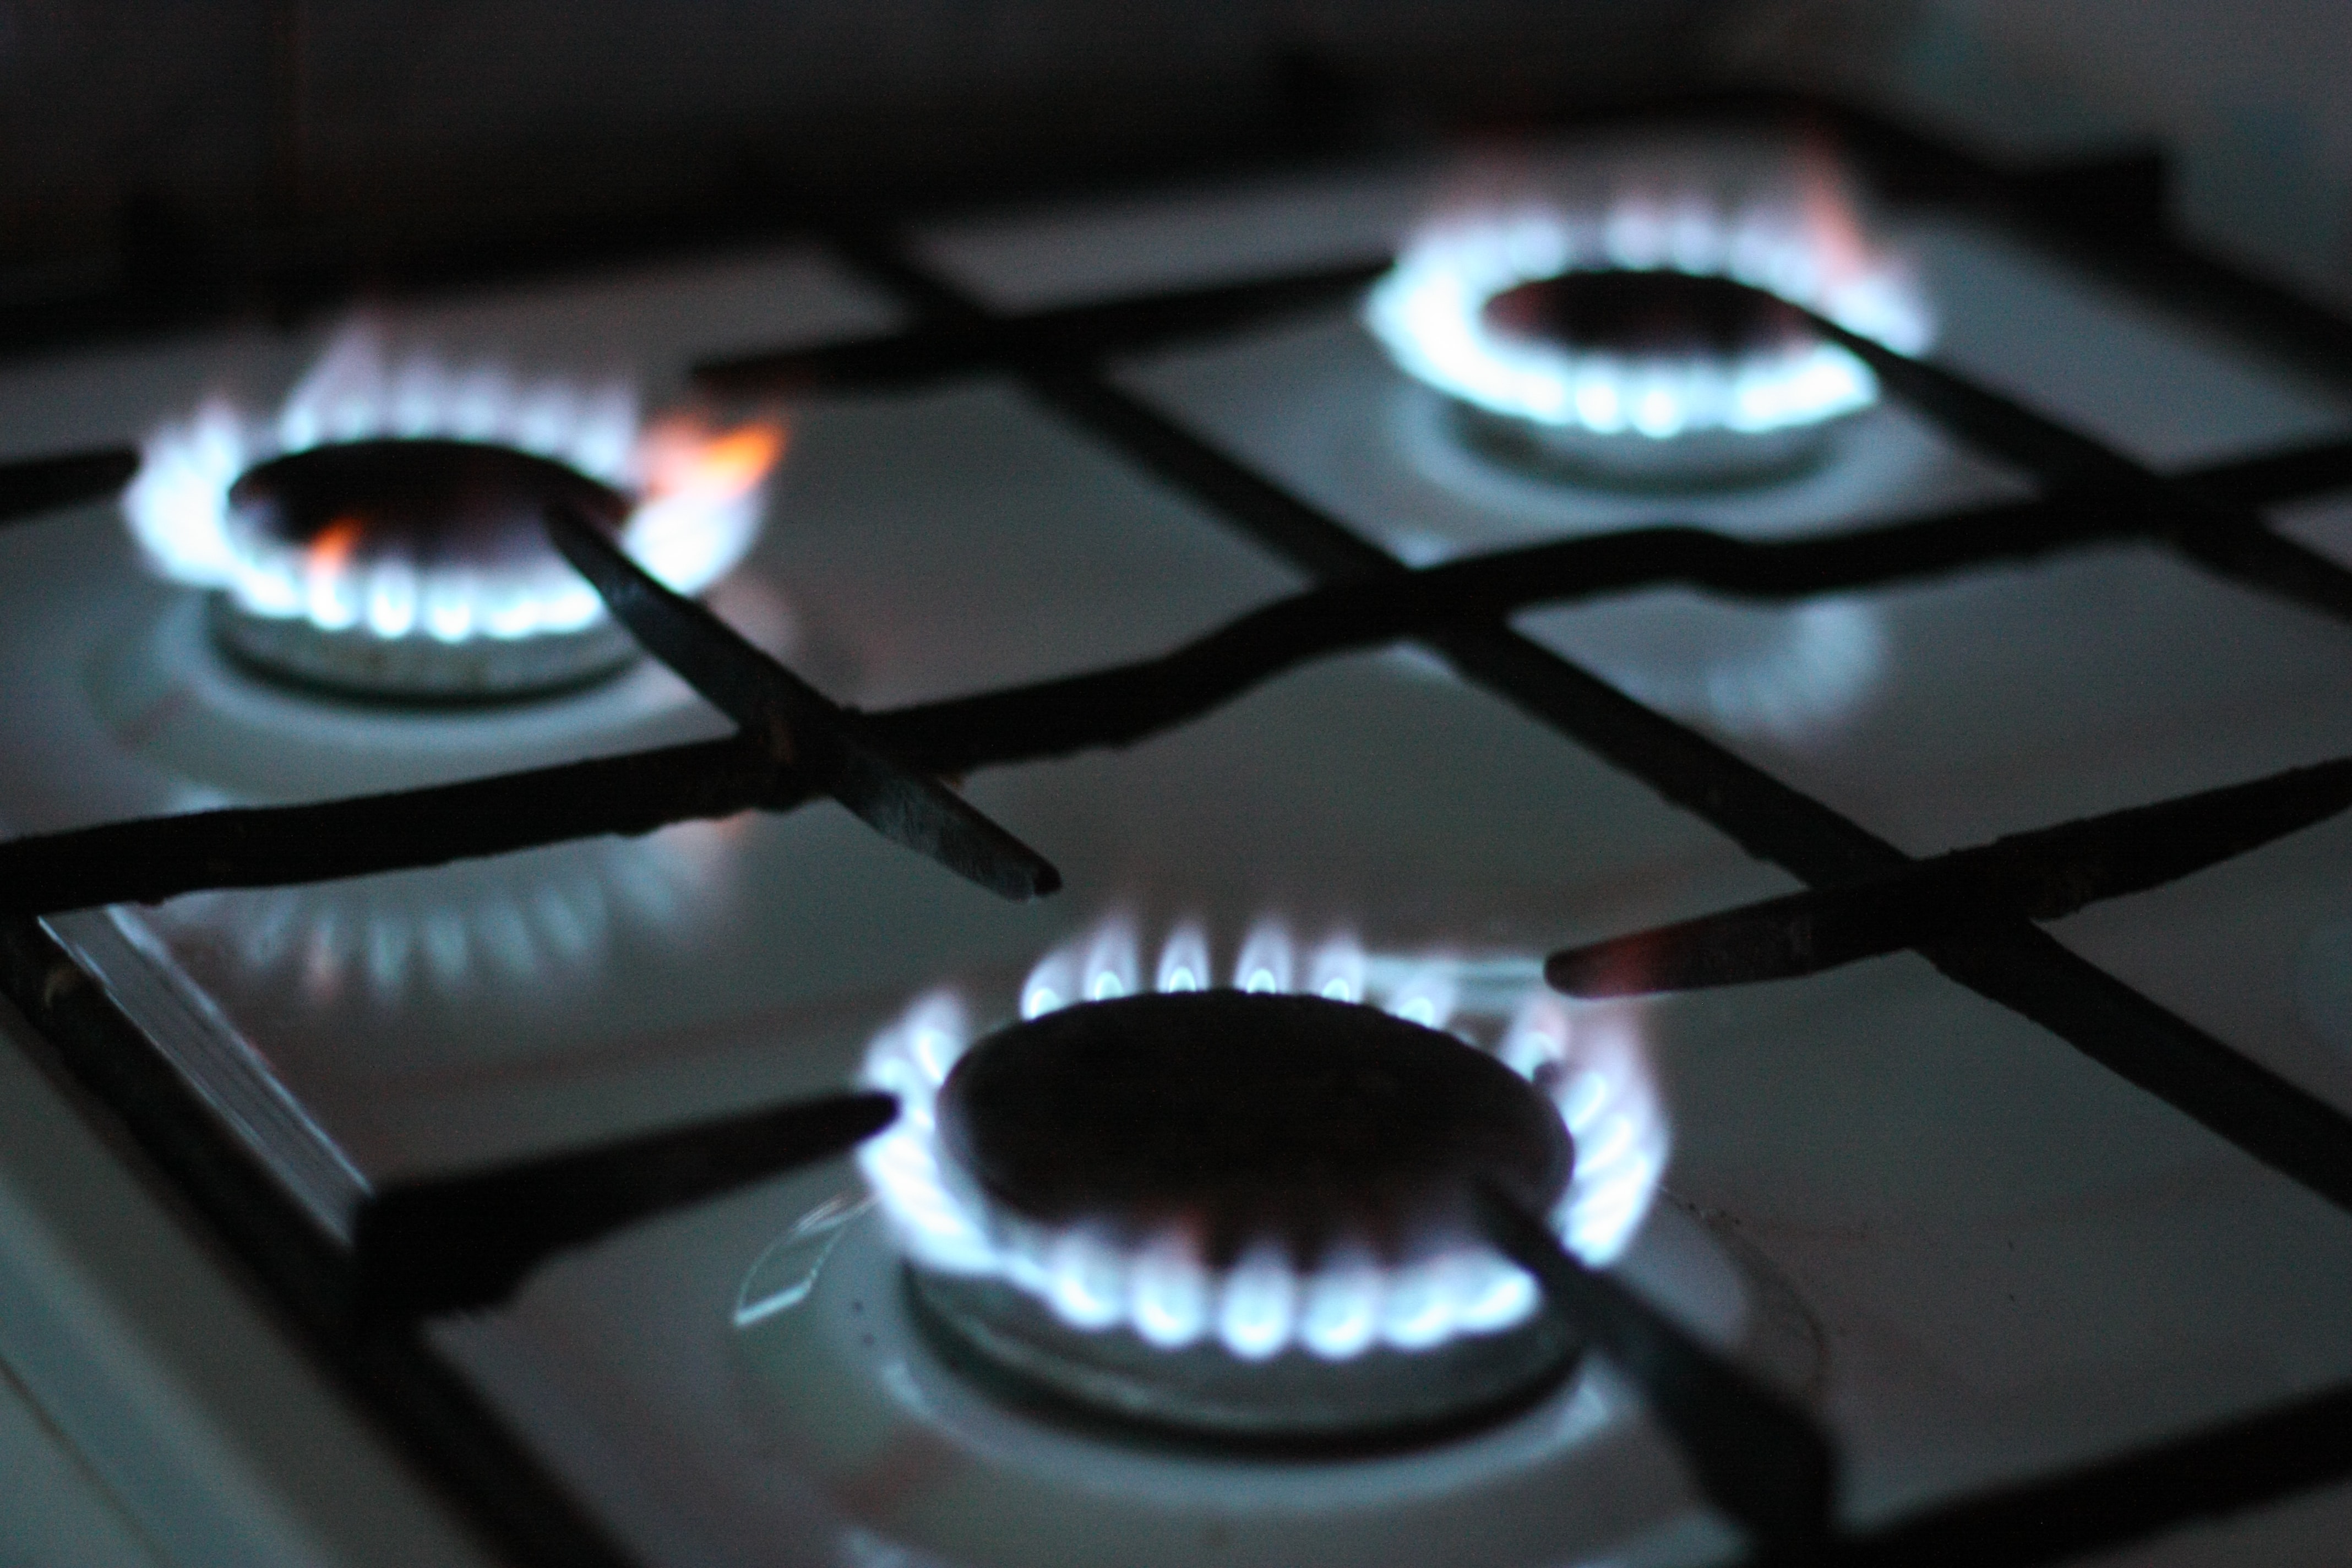 Wonderinterest | After a series of reports on gas price hikes, are better times finally coming?